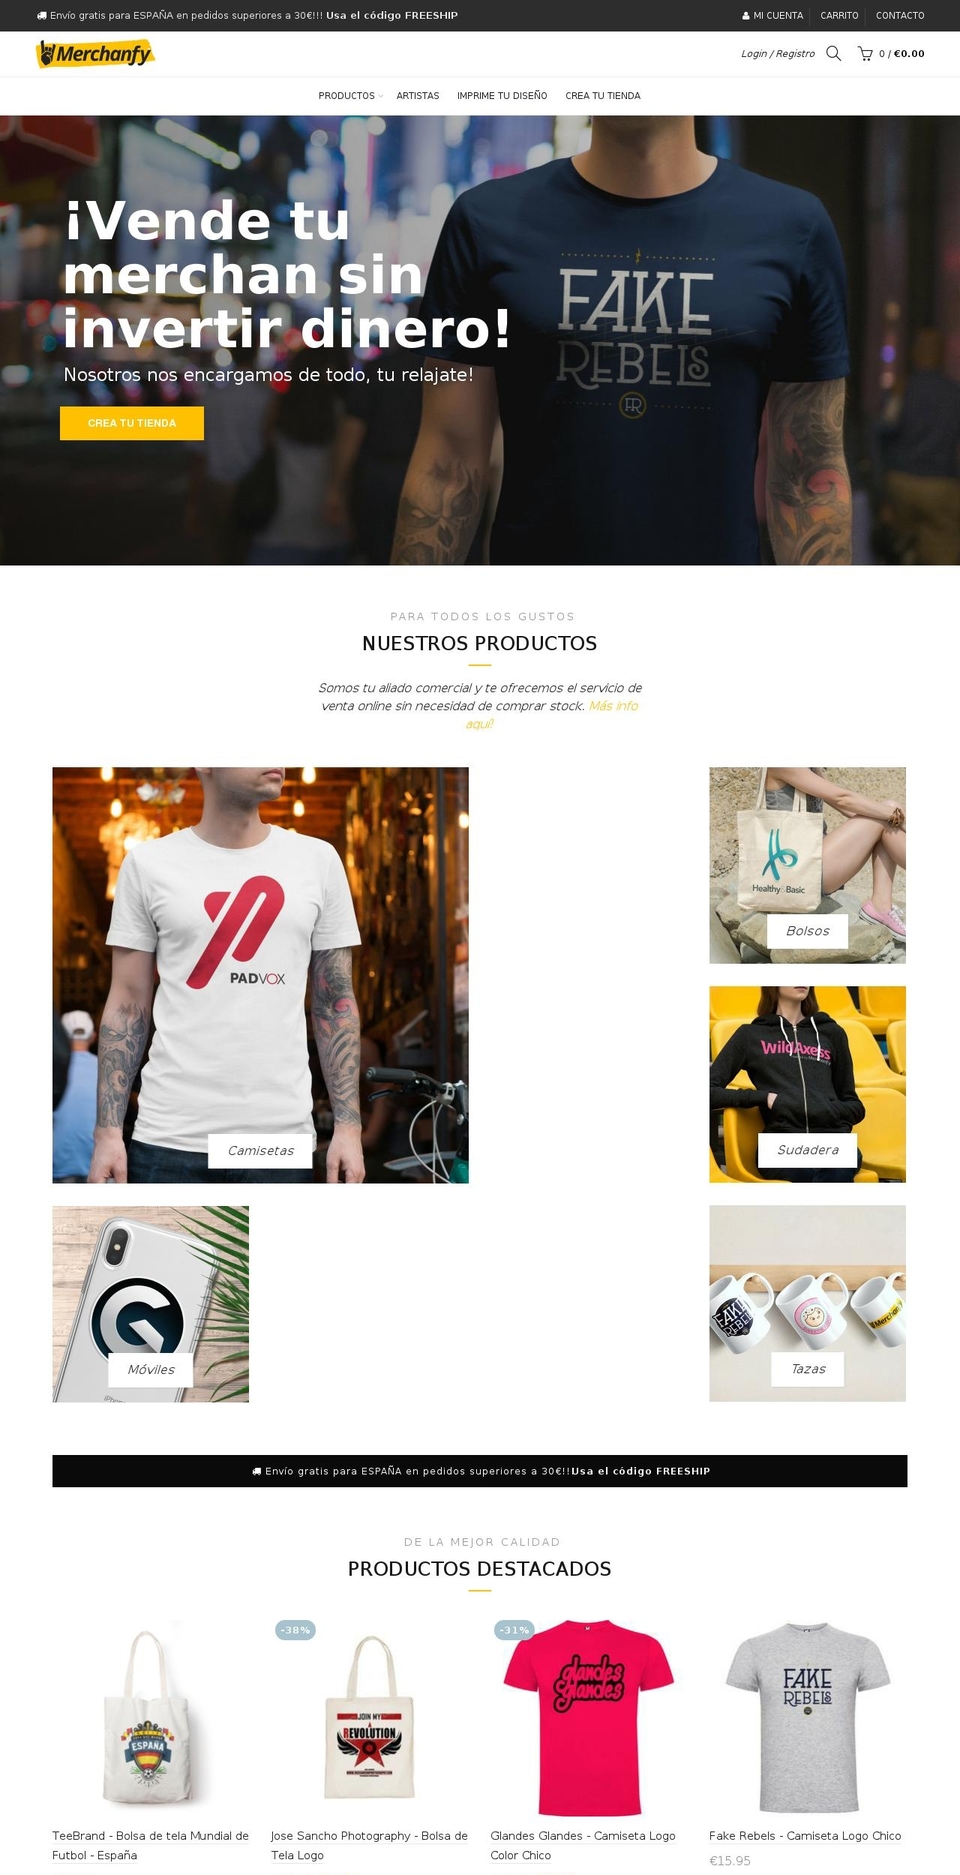 basel Shopify theme site example merchanfy.com